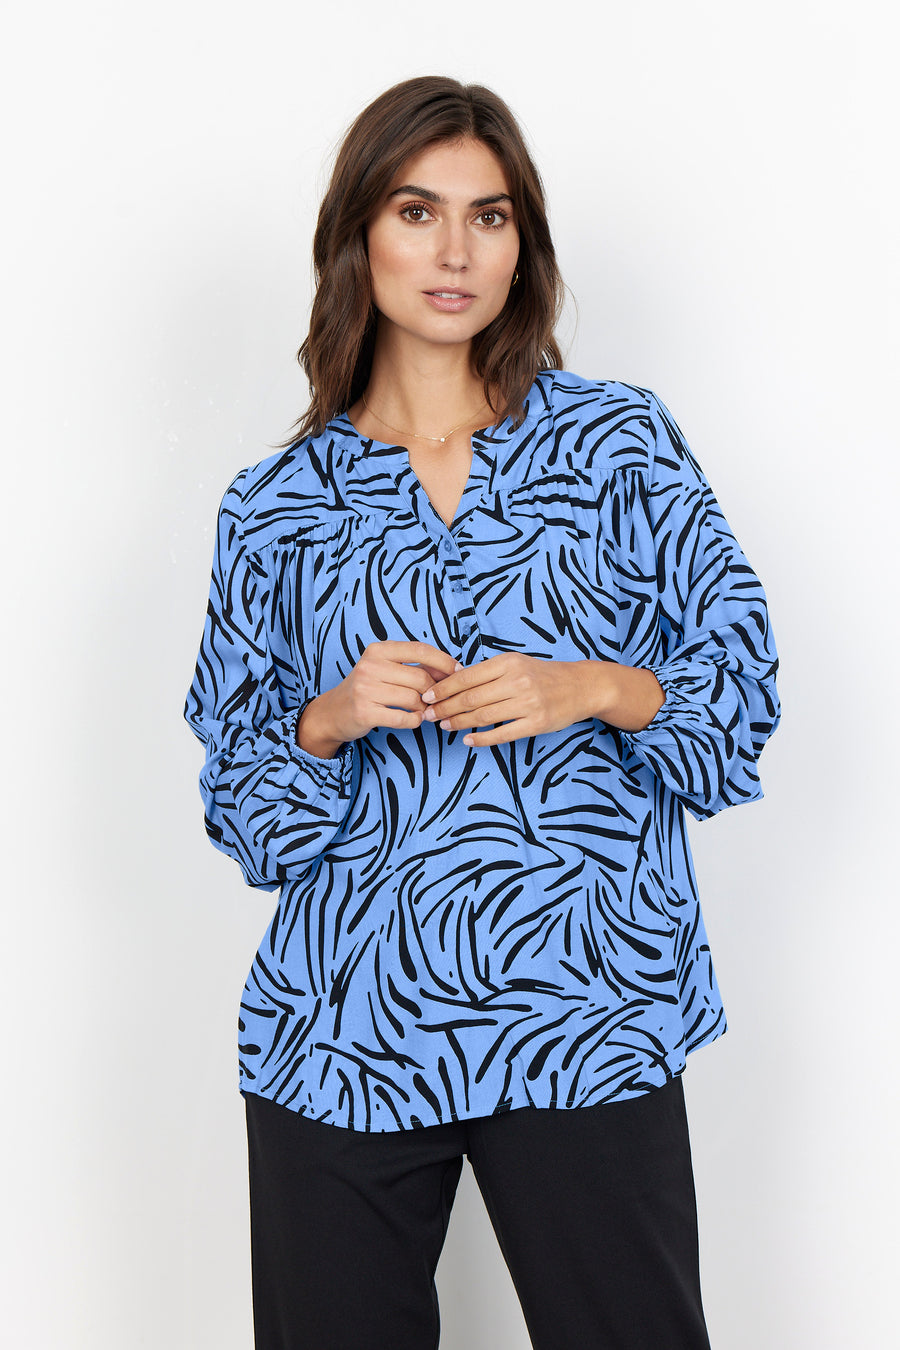 Soya Concept - Jodie Blouse -40% at Checkout